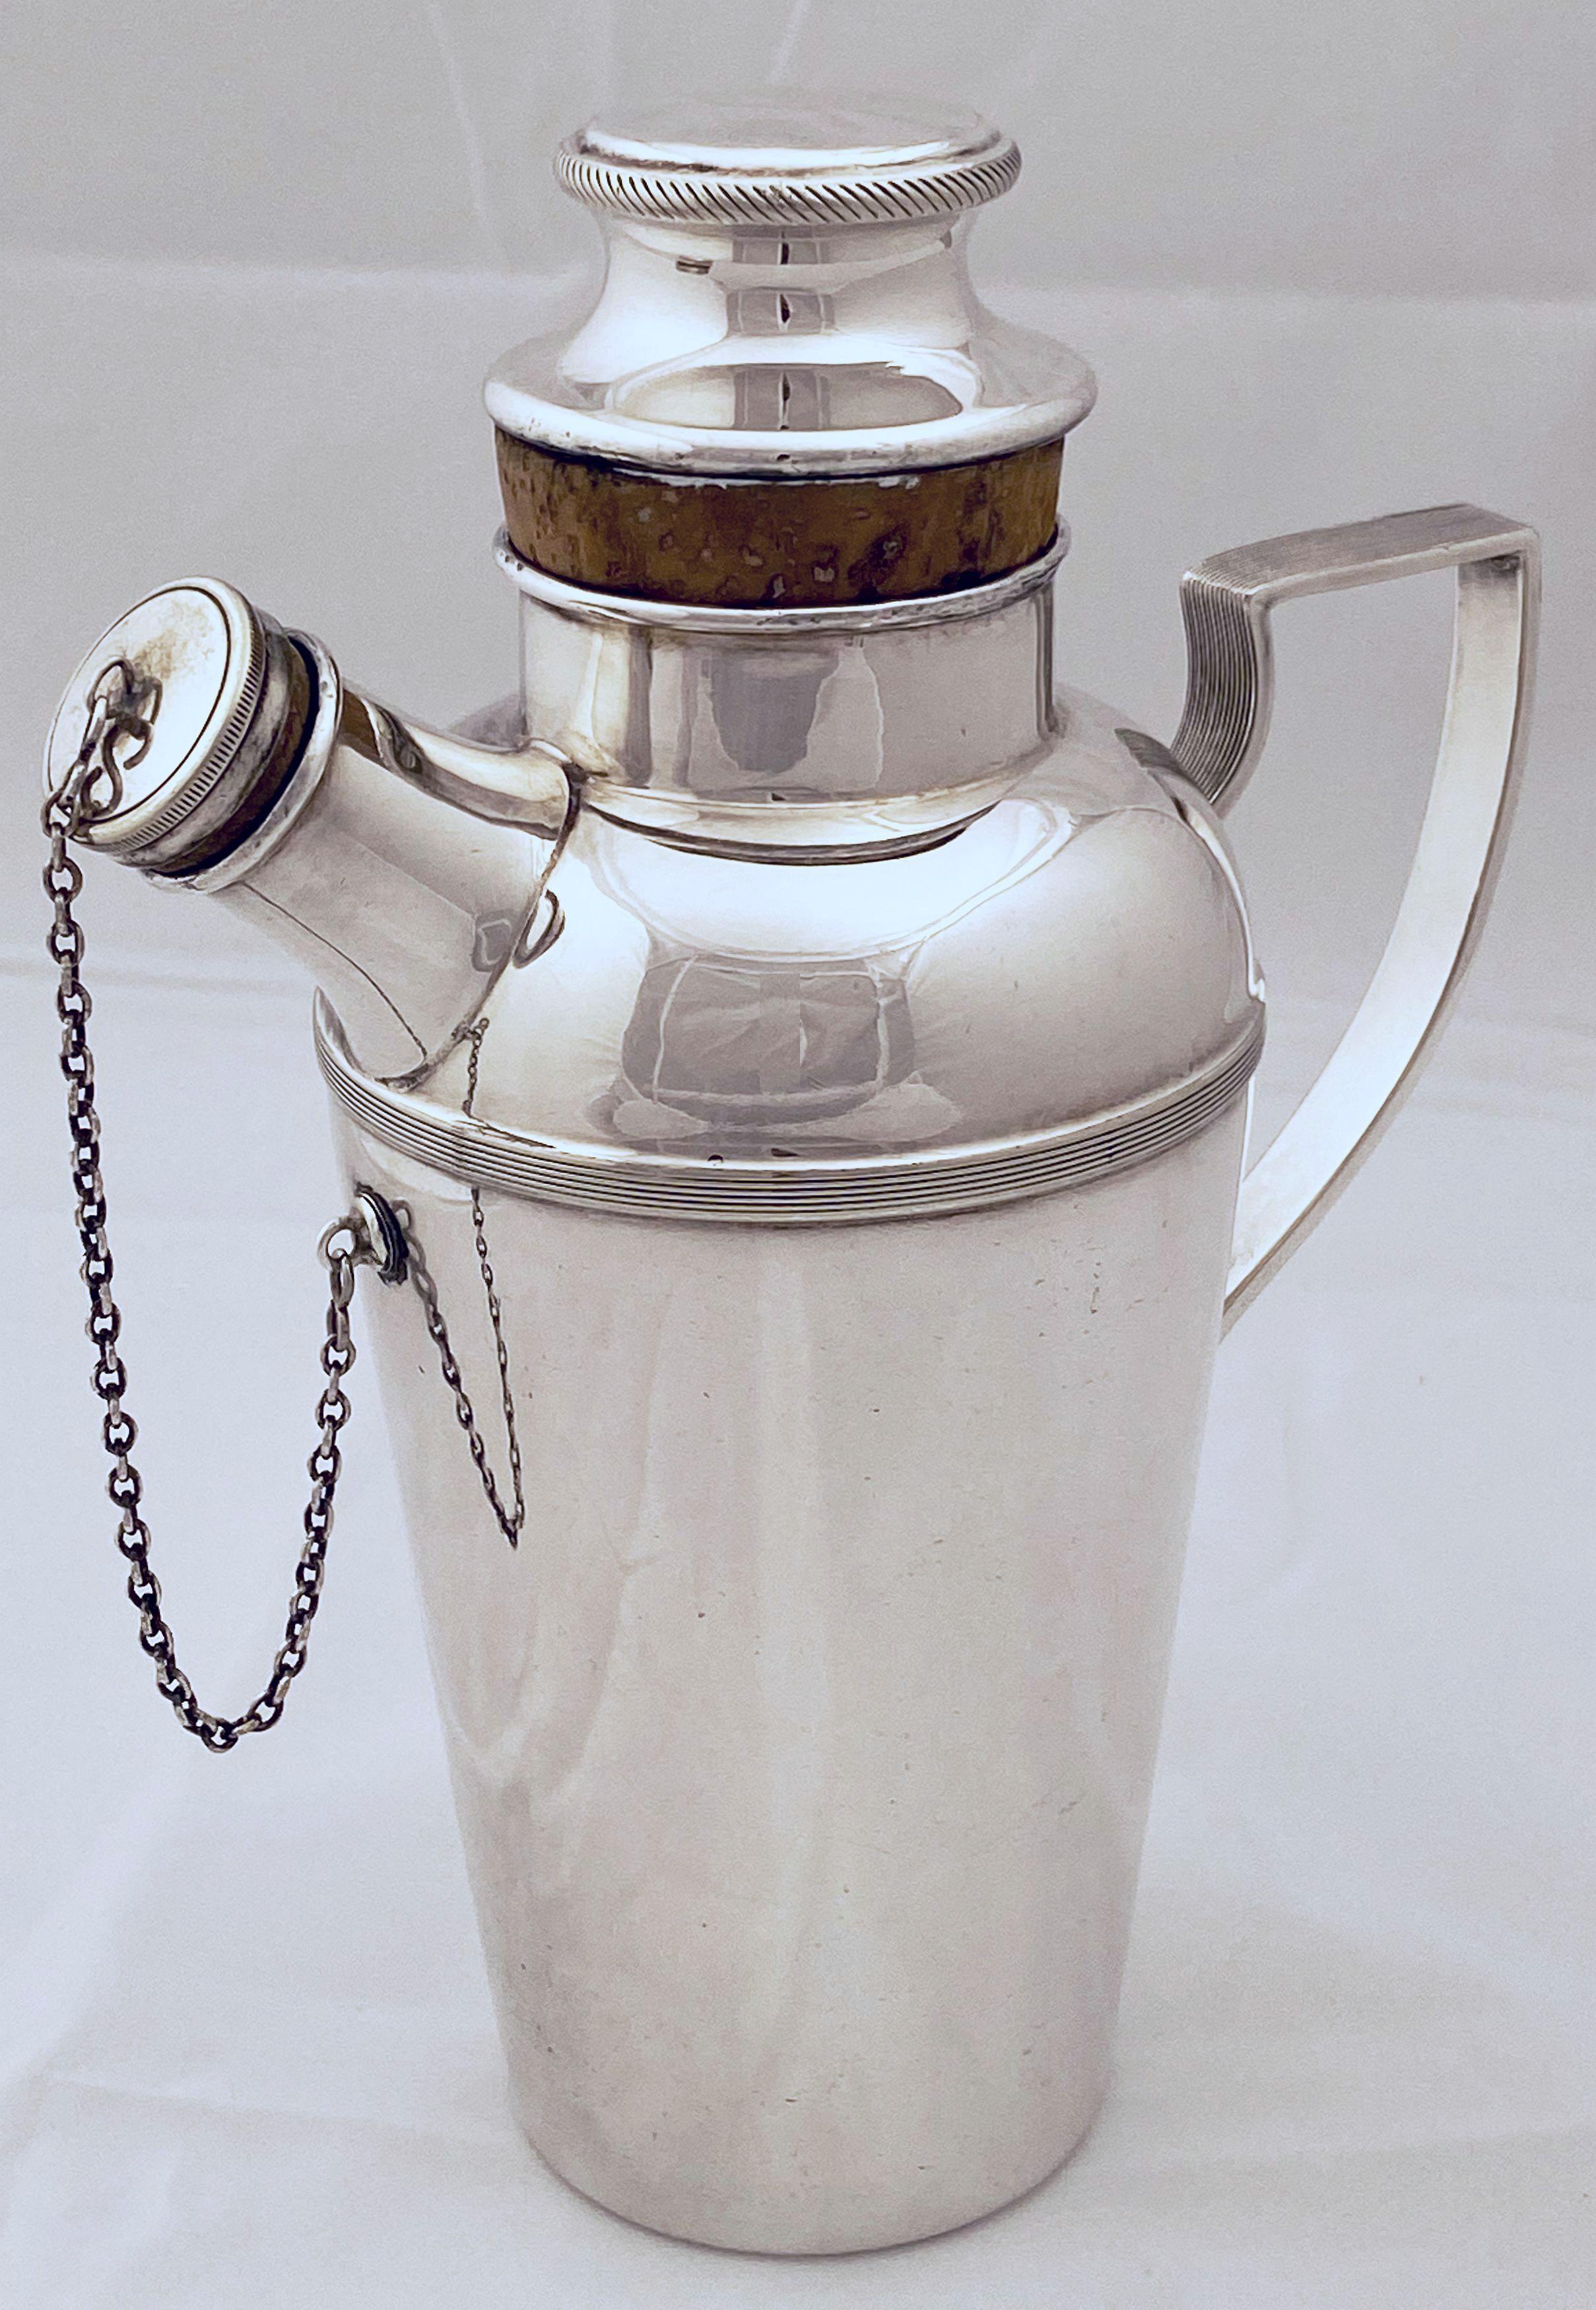 20th Century English Cocktail or Martini Shaker from the Art Deco Period by James Dixon